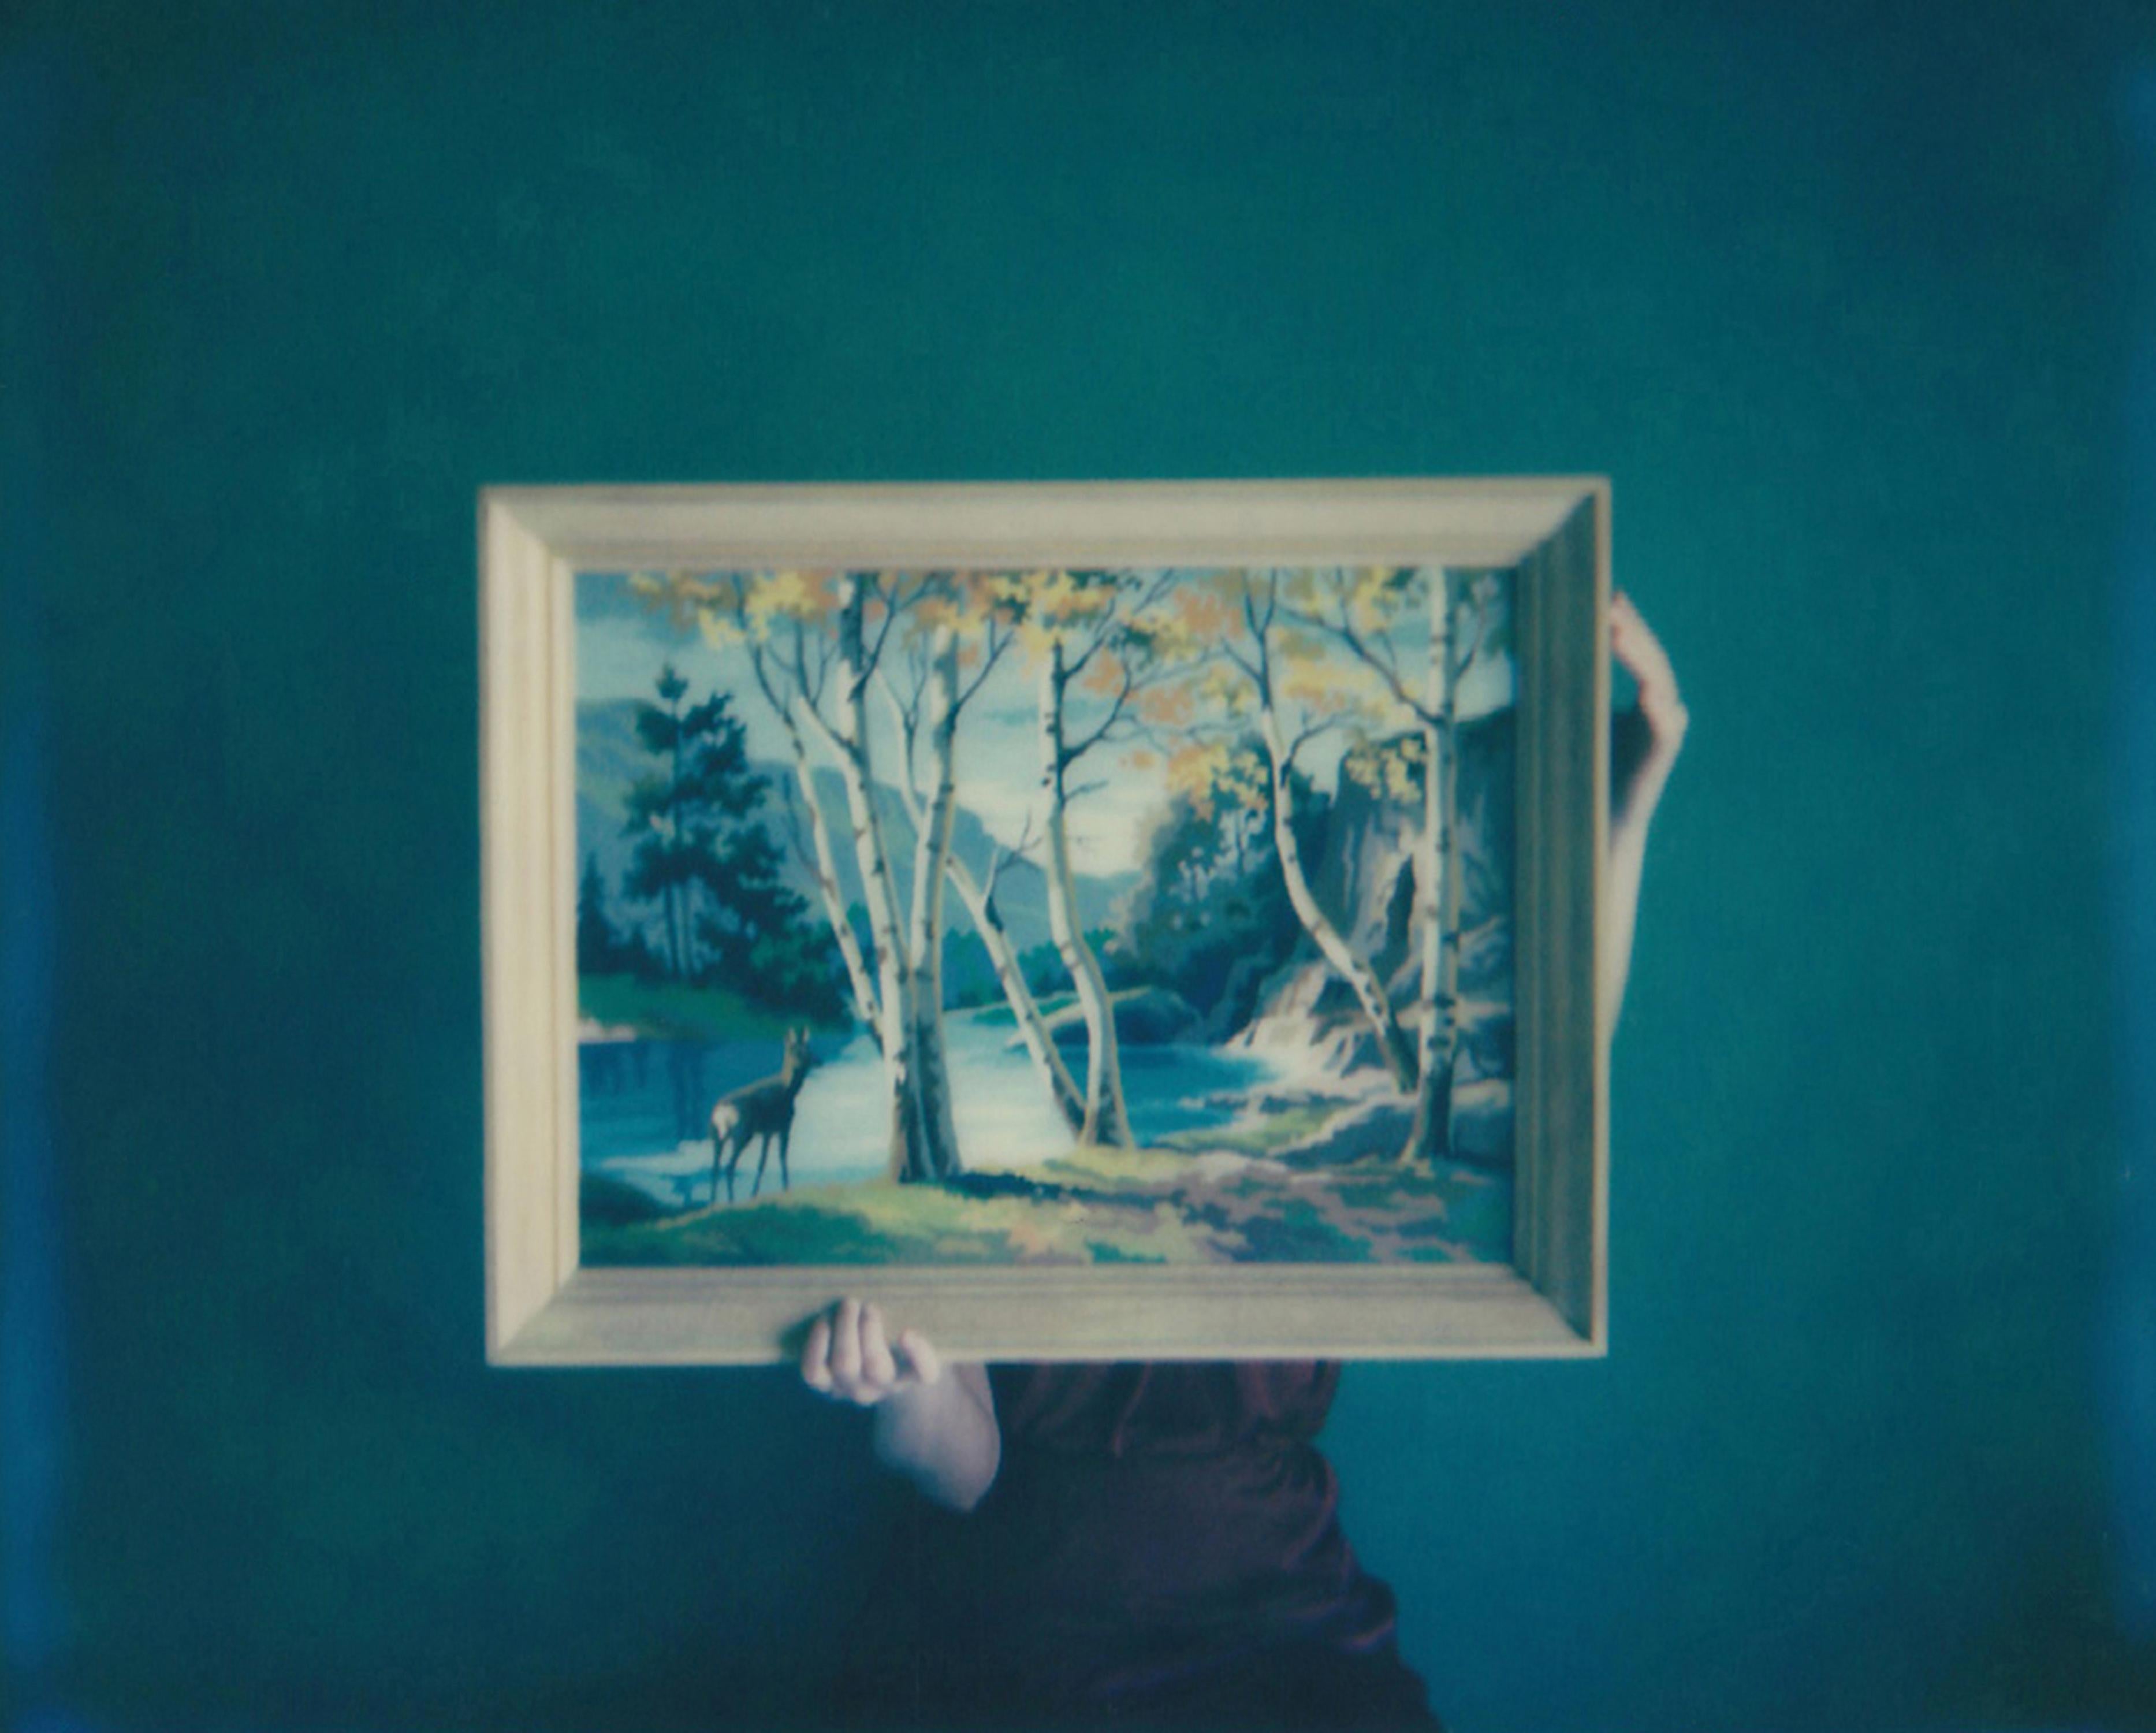 Lisa Toboz Color Photograph - Into the Woods - Contemporary, Woman, Polaroid, Painting, Interior, Landscape